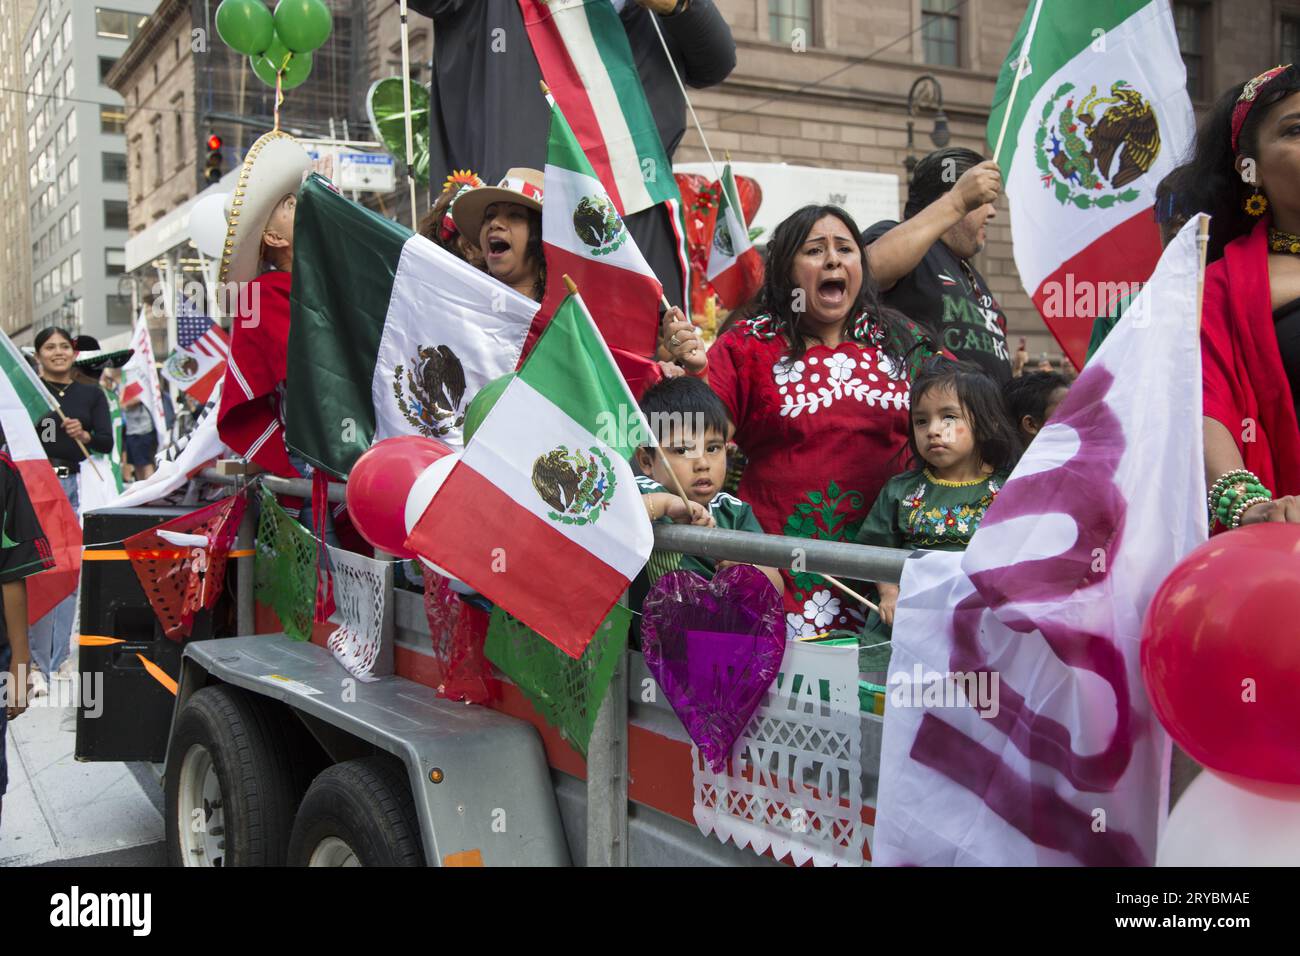 Mexican Independence Day Parade along Madison Avenue in New York City